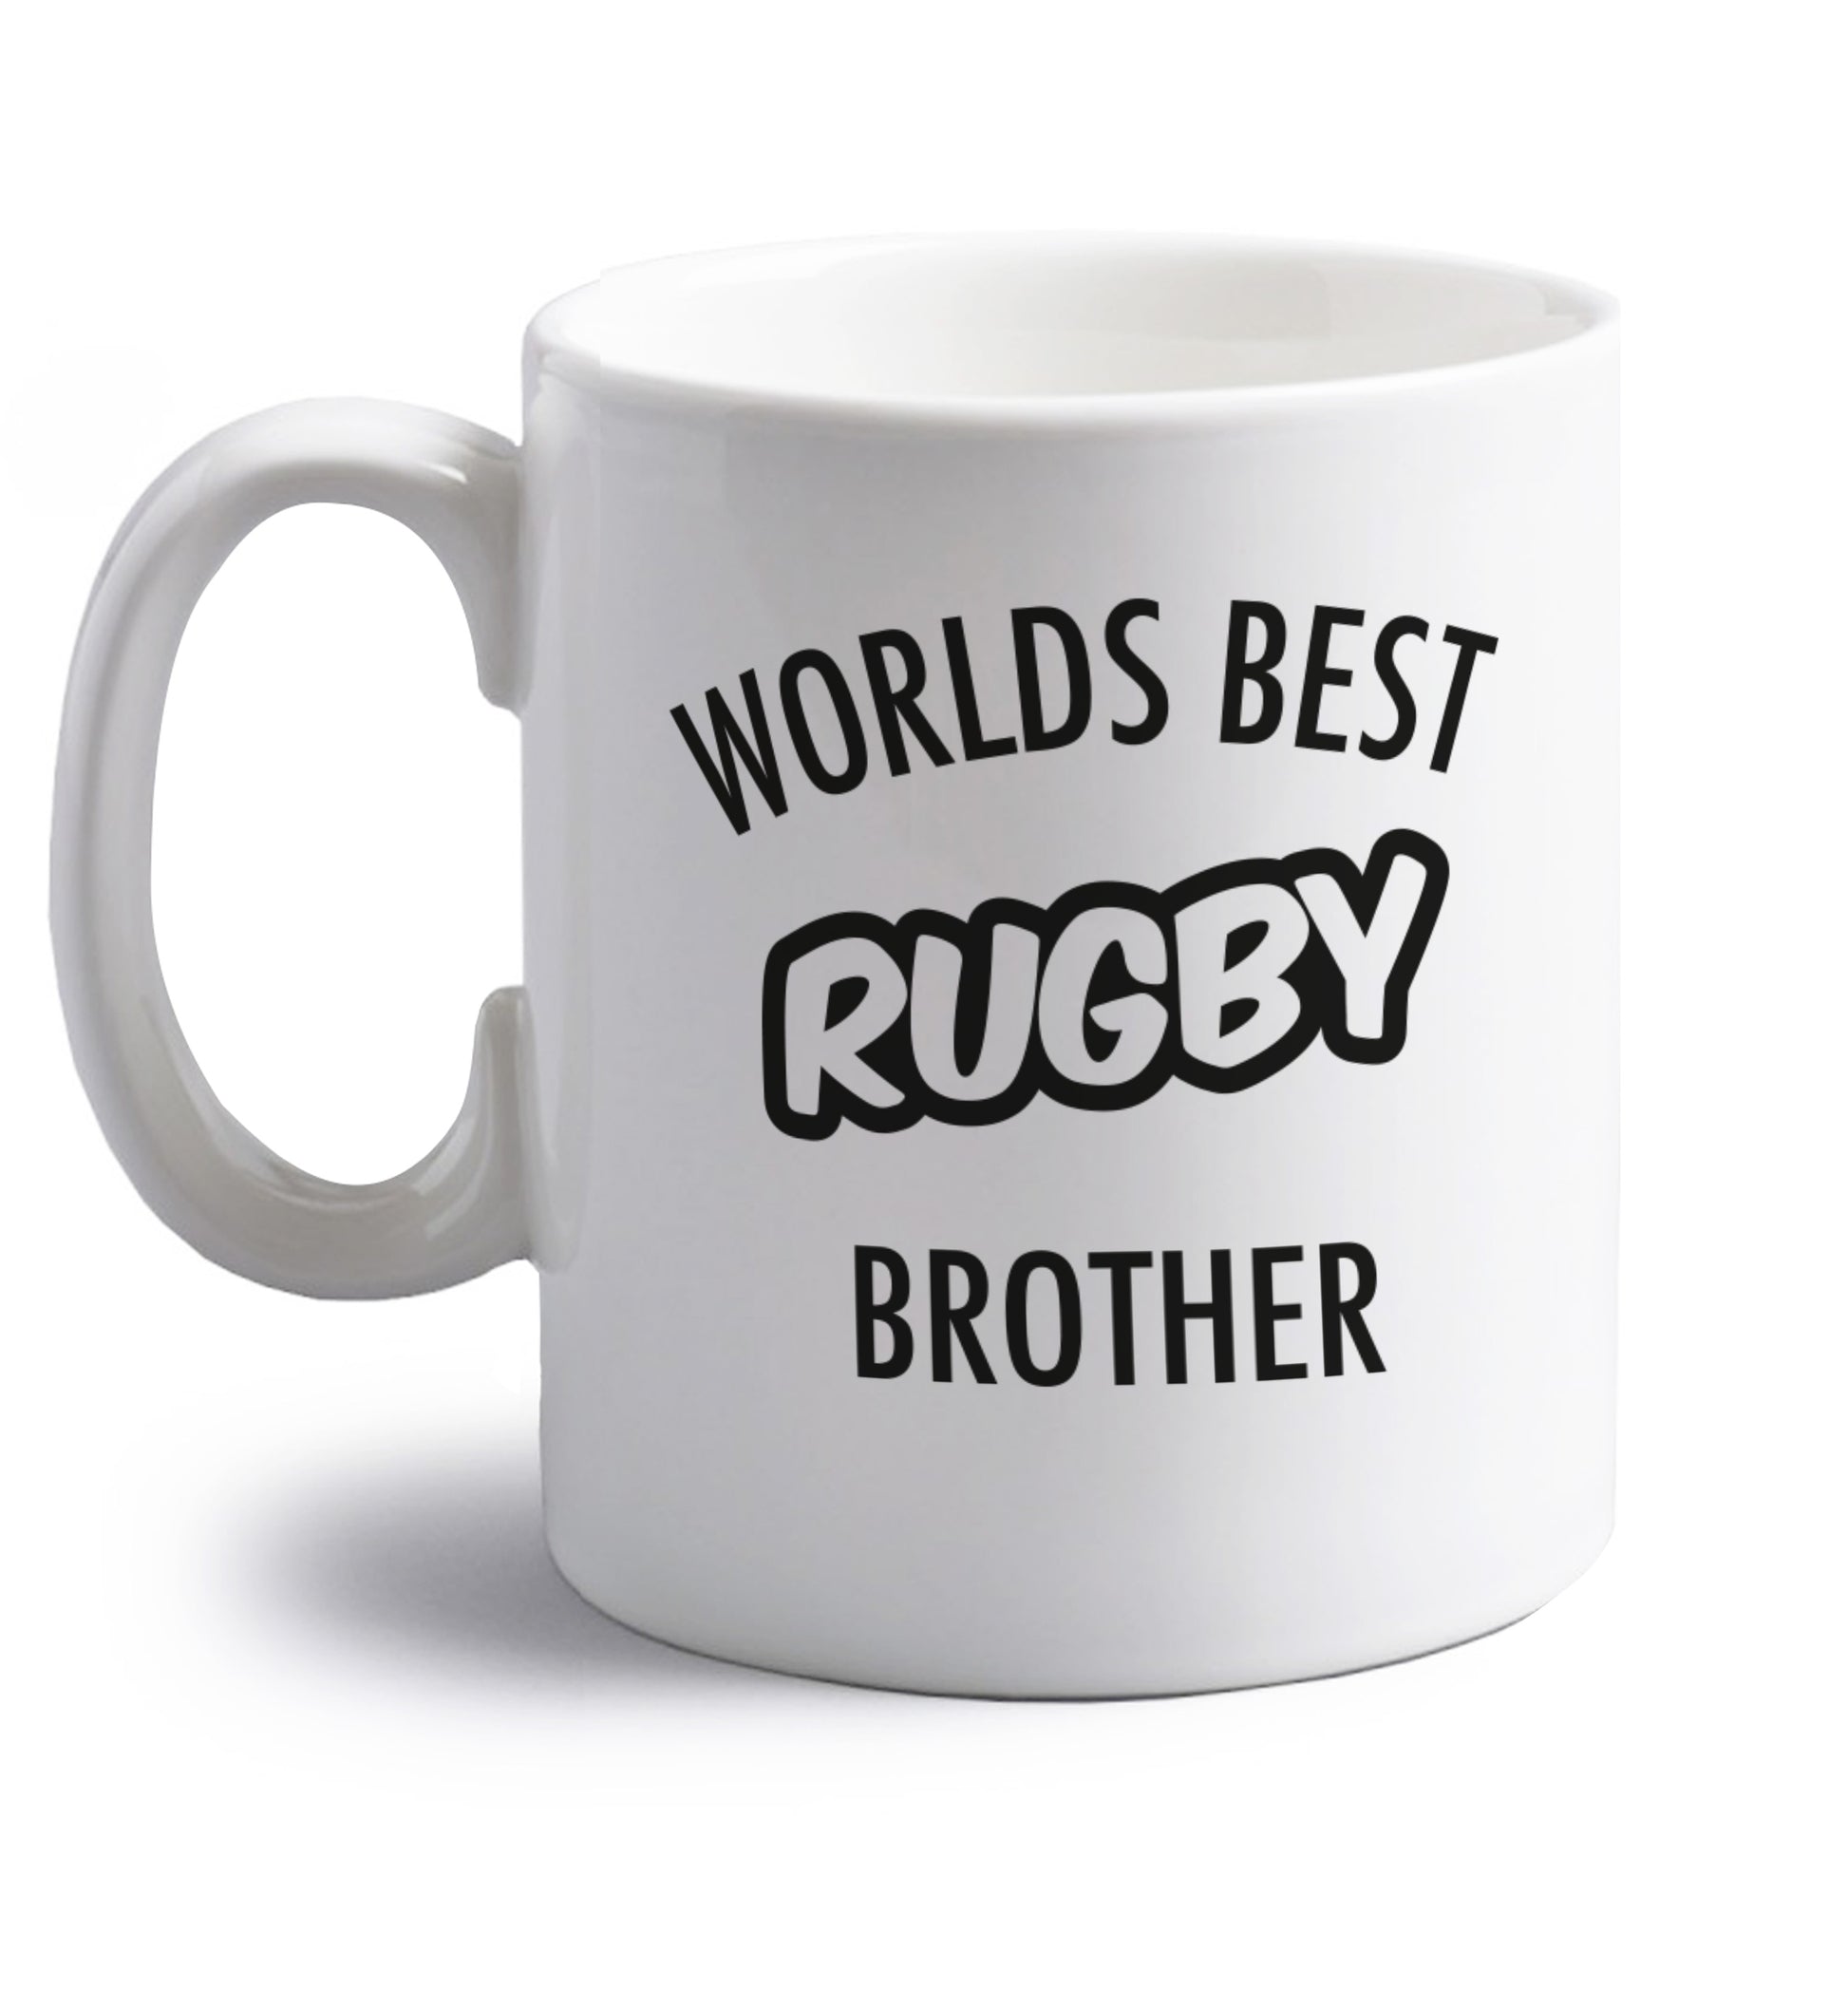 Worlds best rugby brother right handed white ceramic mug 